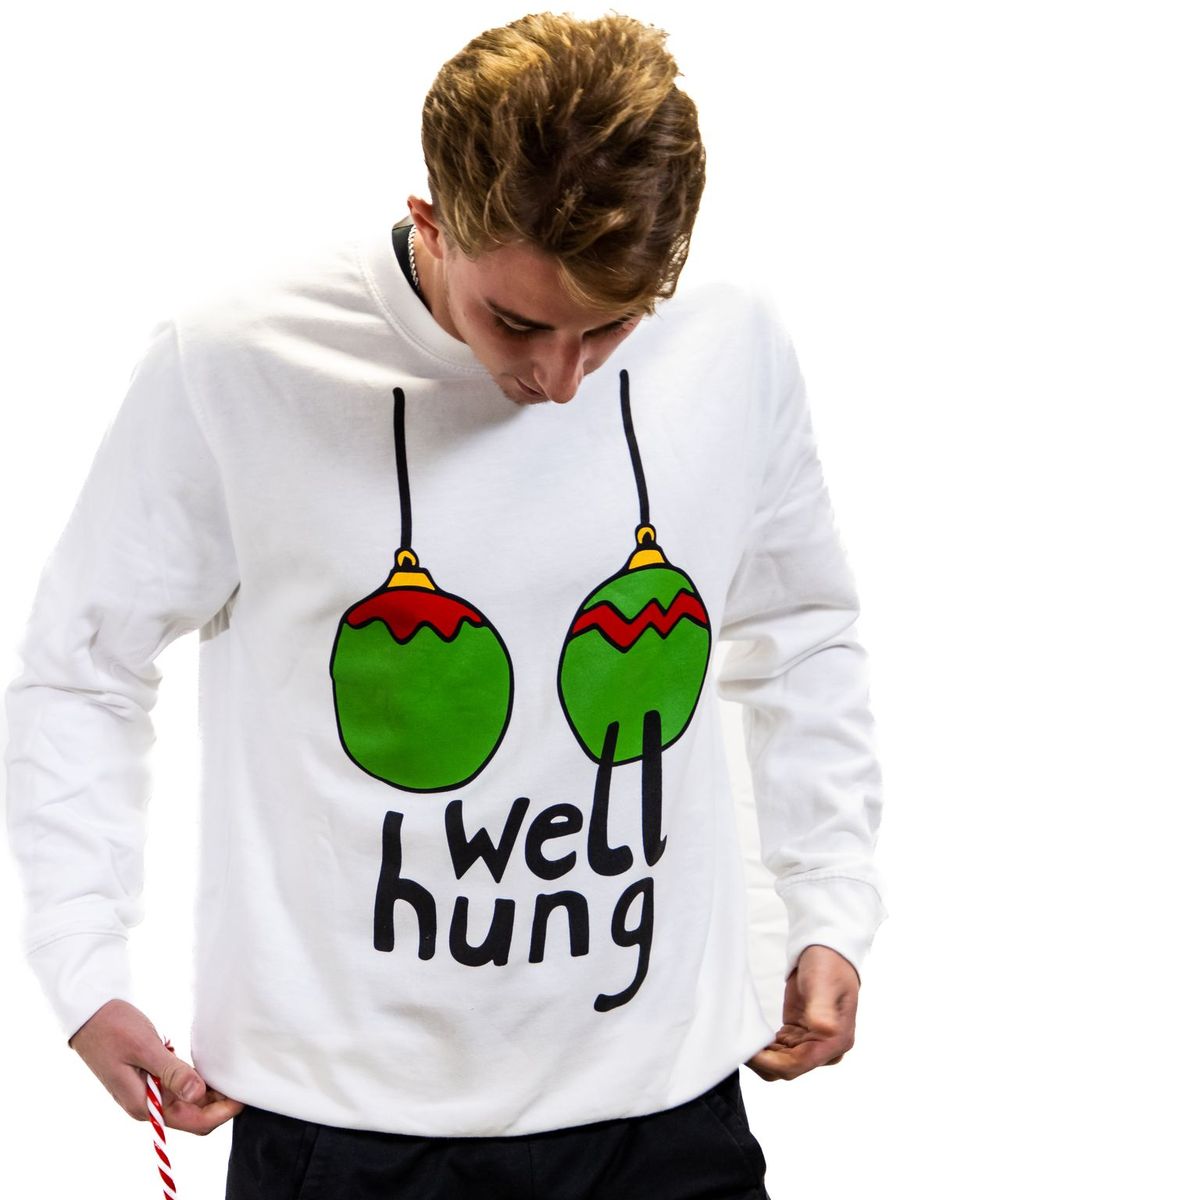 Well Hung - Rude Christmas Jumper - White